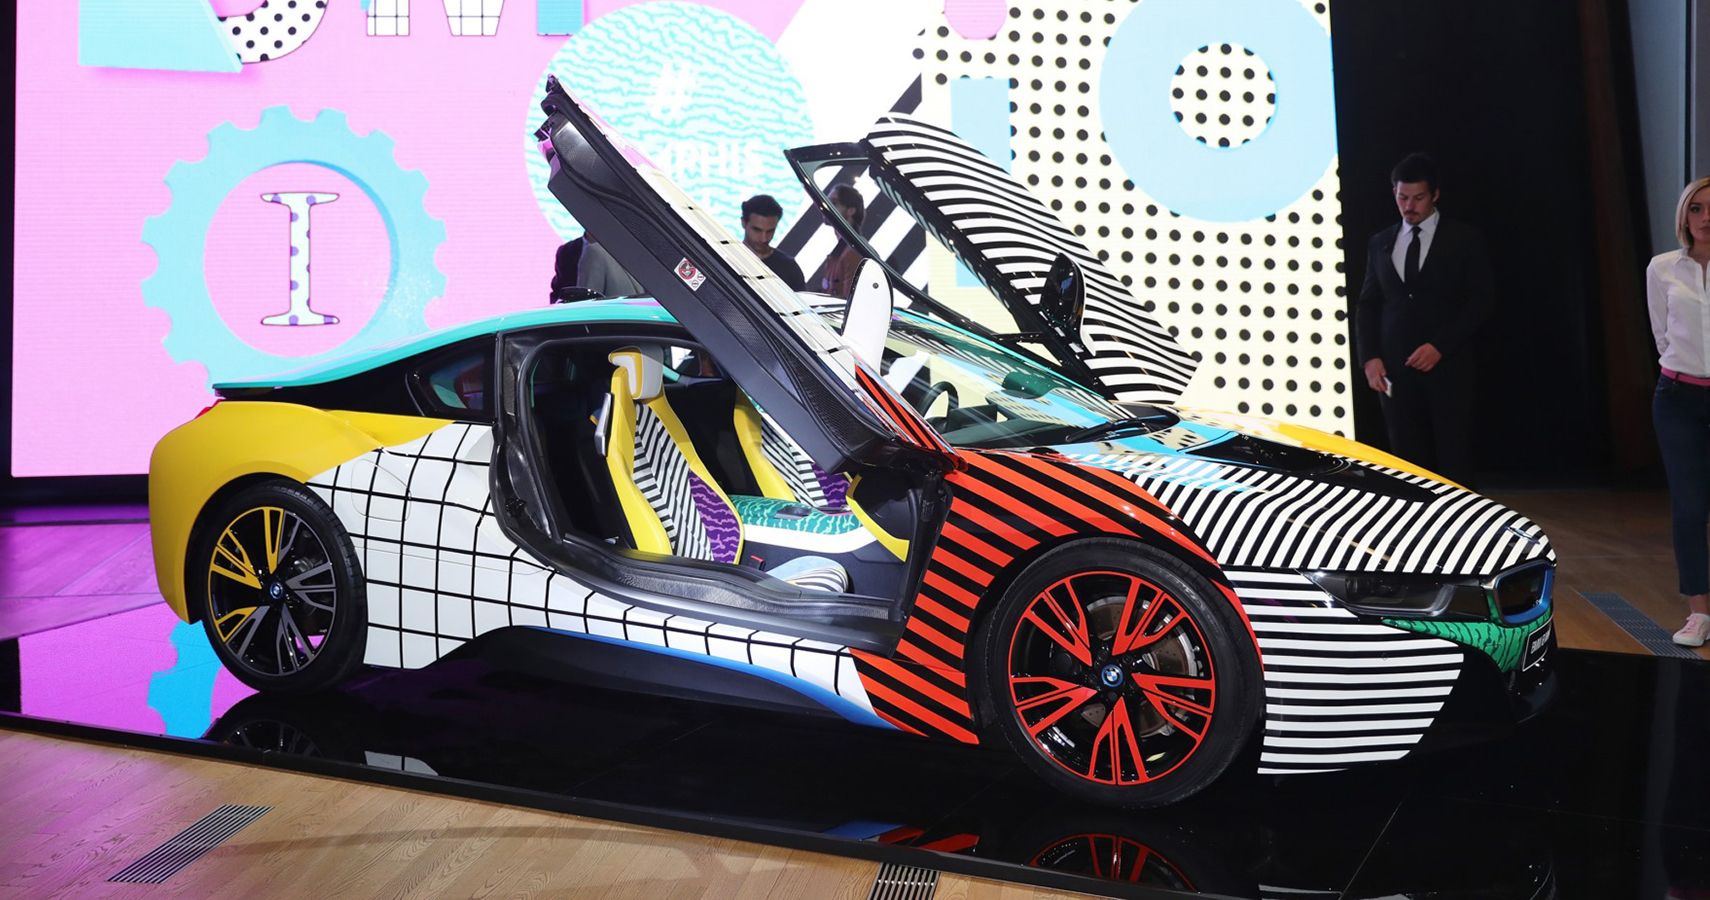 BMW i8 Memphis Style: Colorful Caricature